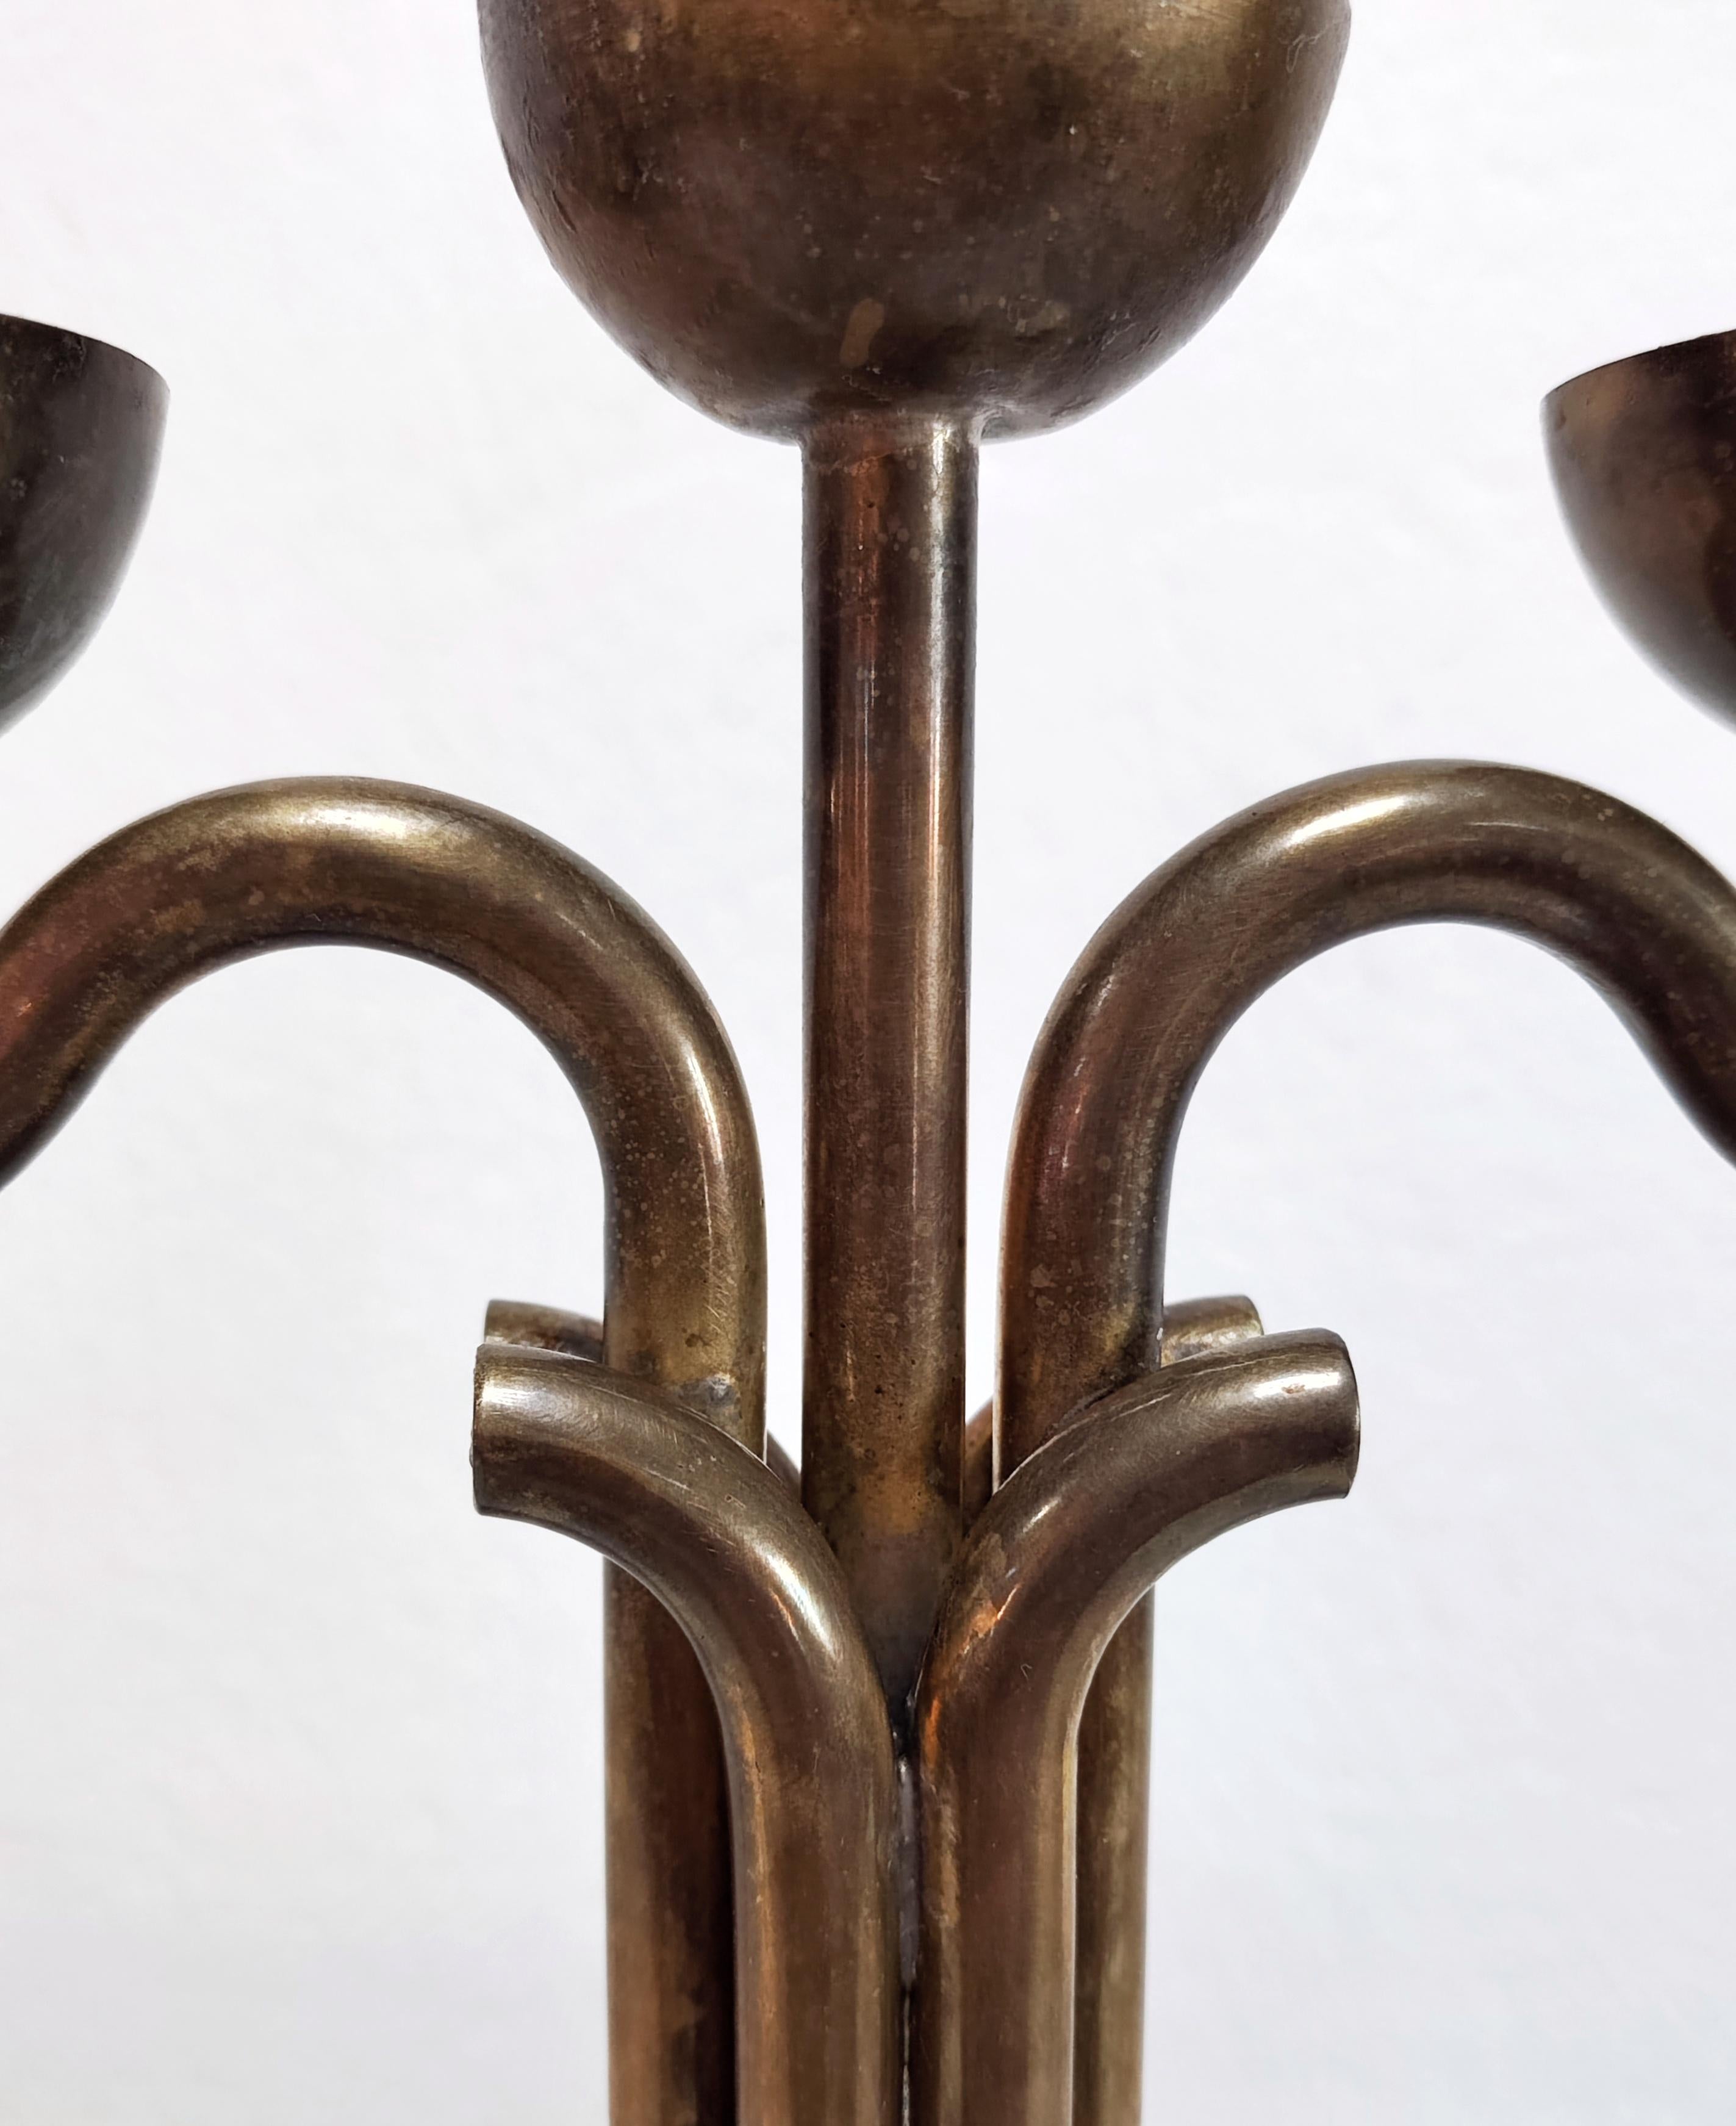 Late 20th Century Brutalist Candlestick Holder Done in Brass and Nickel, Italy, 1970s For Sale